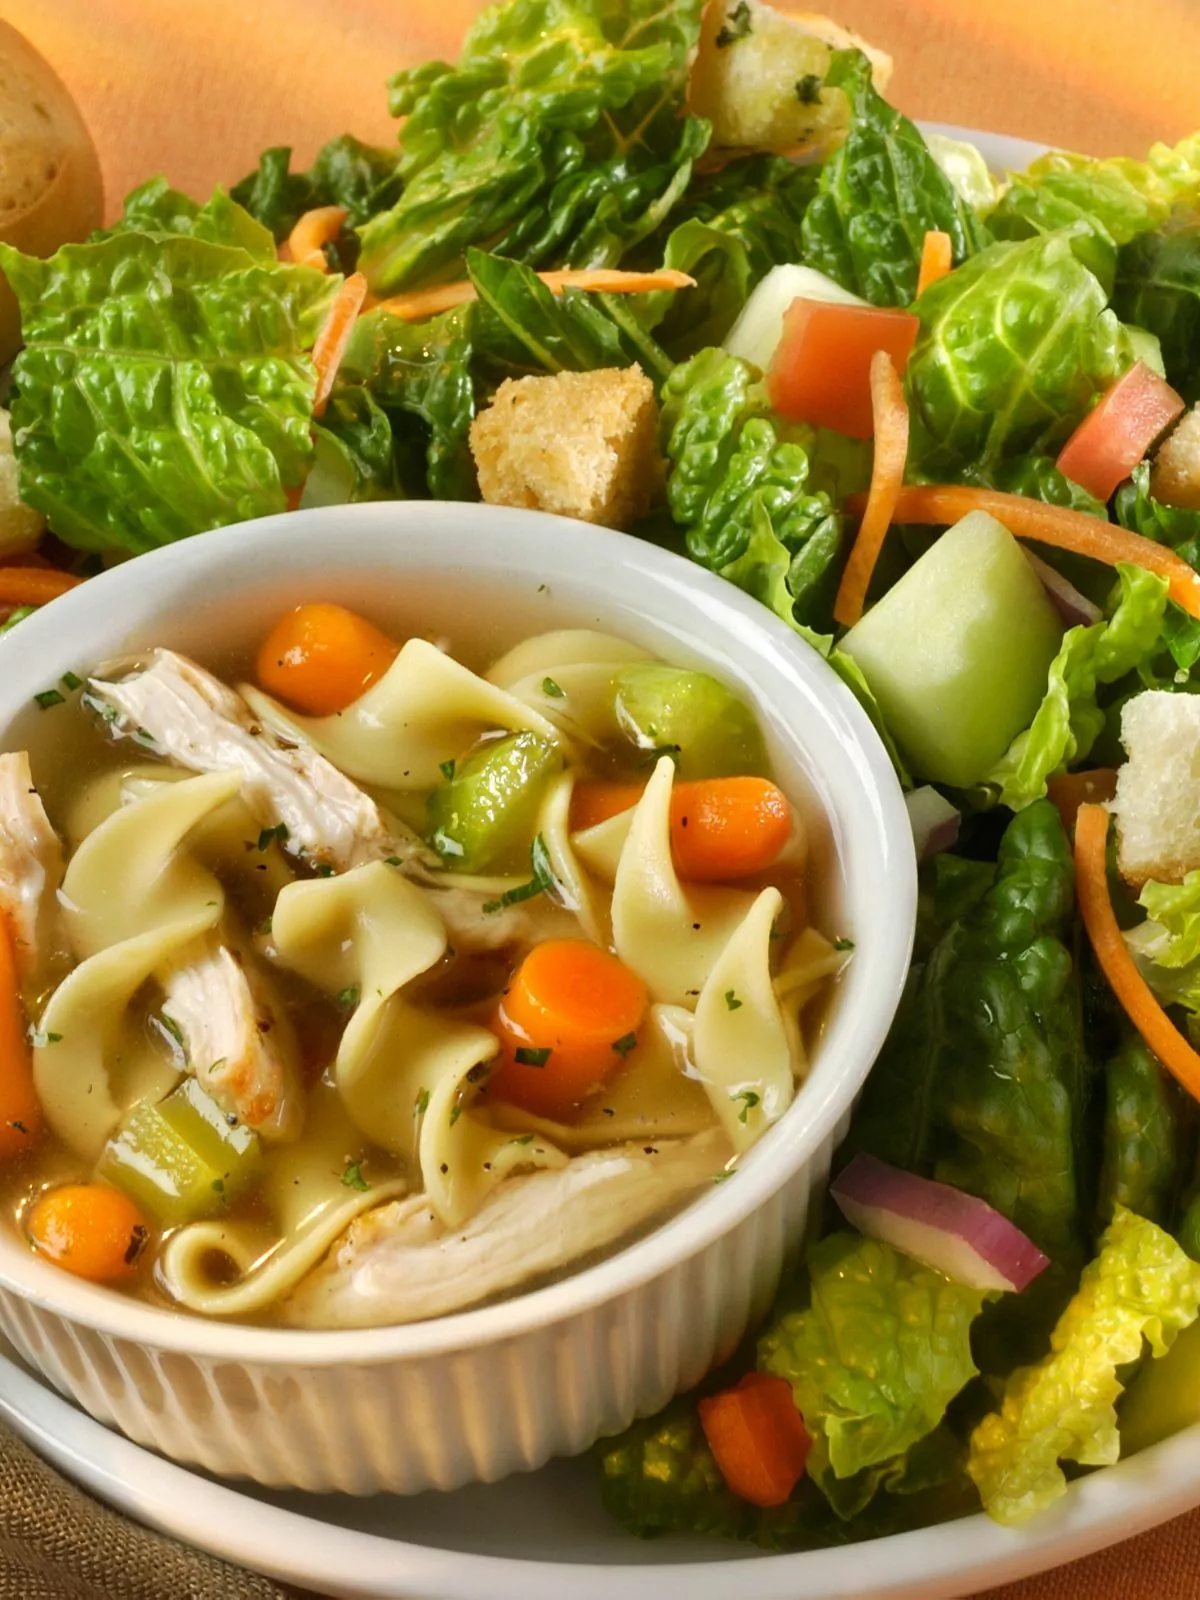 chicken soup with tossed salad on the side.